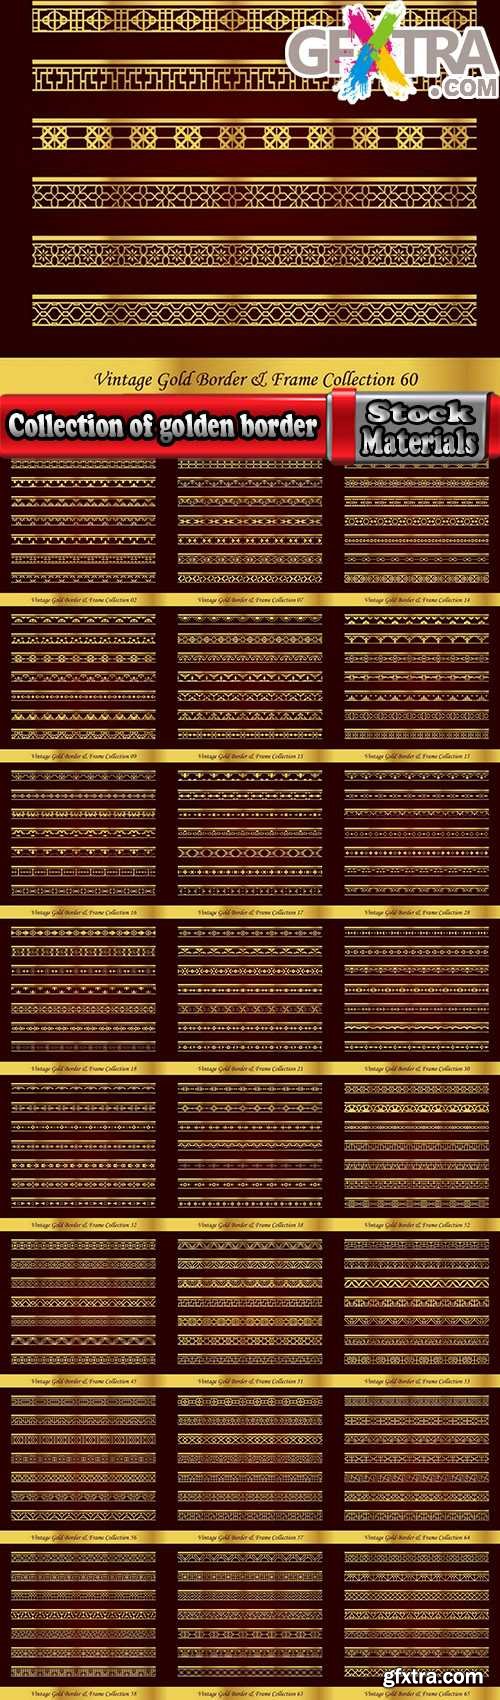 Collection of golden border frame framing vice calligraphic elements 25 EPS